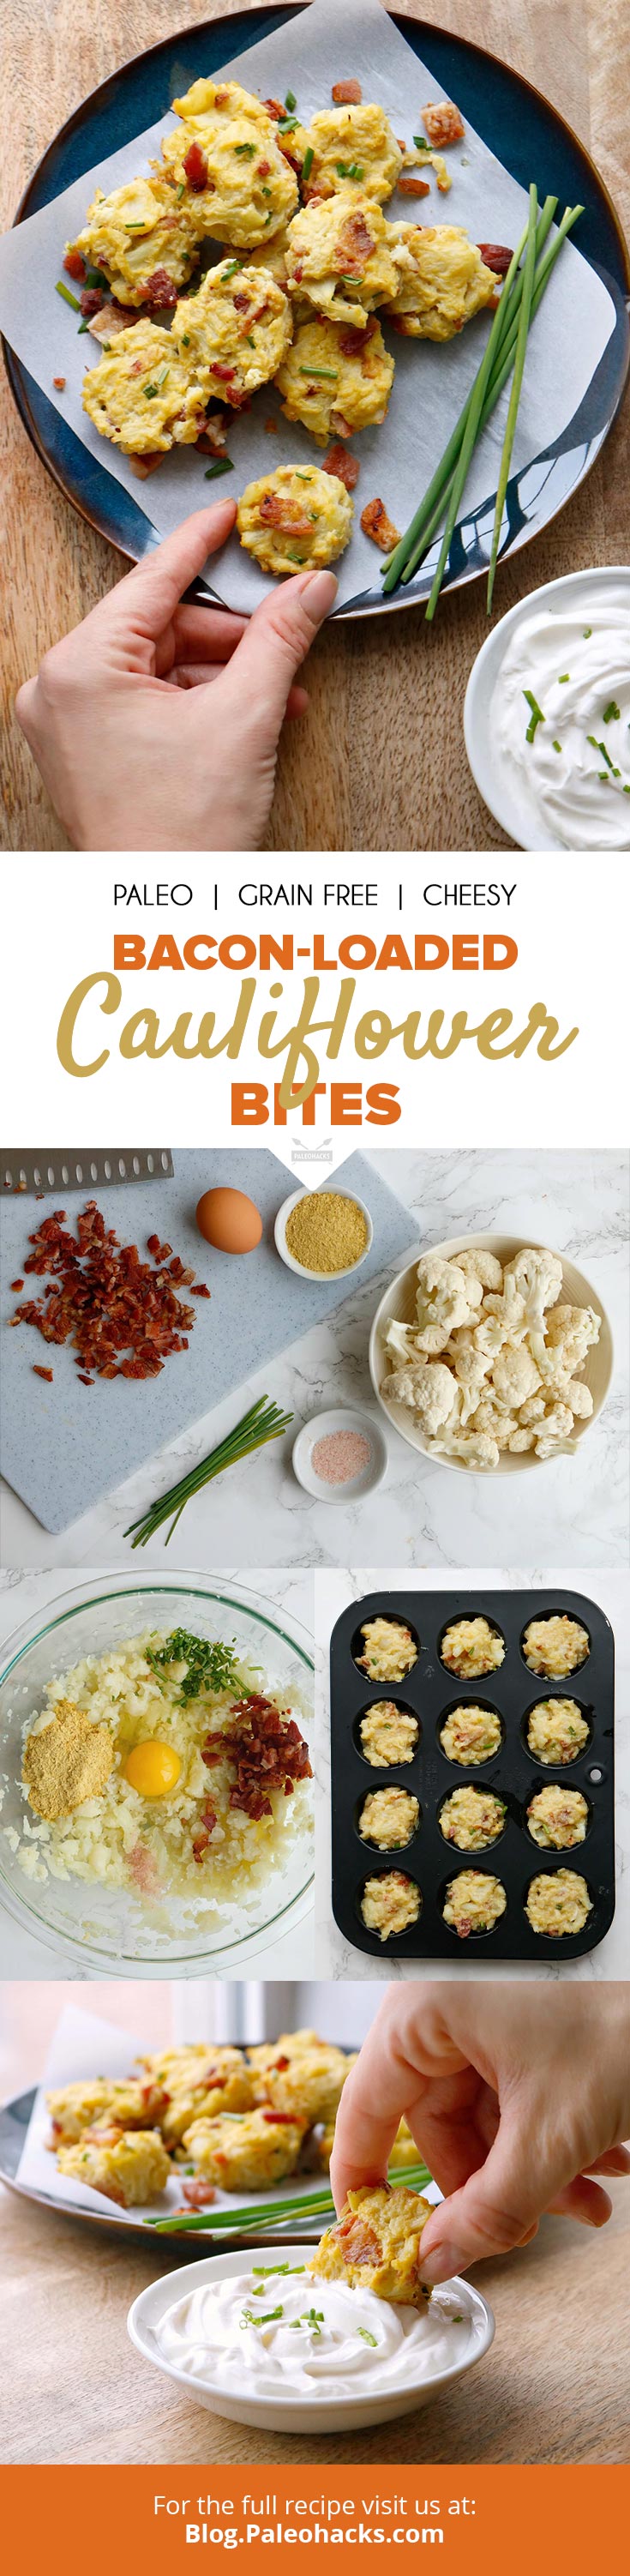 Mashed cauliflower stands in for the potatoes in this bacon-loaded munchie! Serve your cauliflower bites hot with Paleo sour cream for full-on goodness.